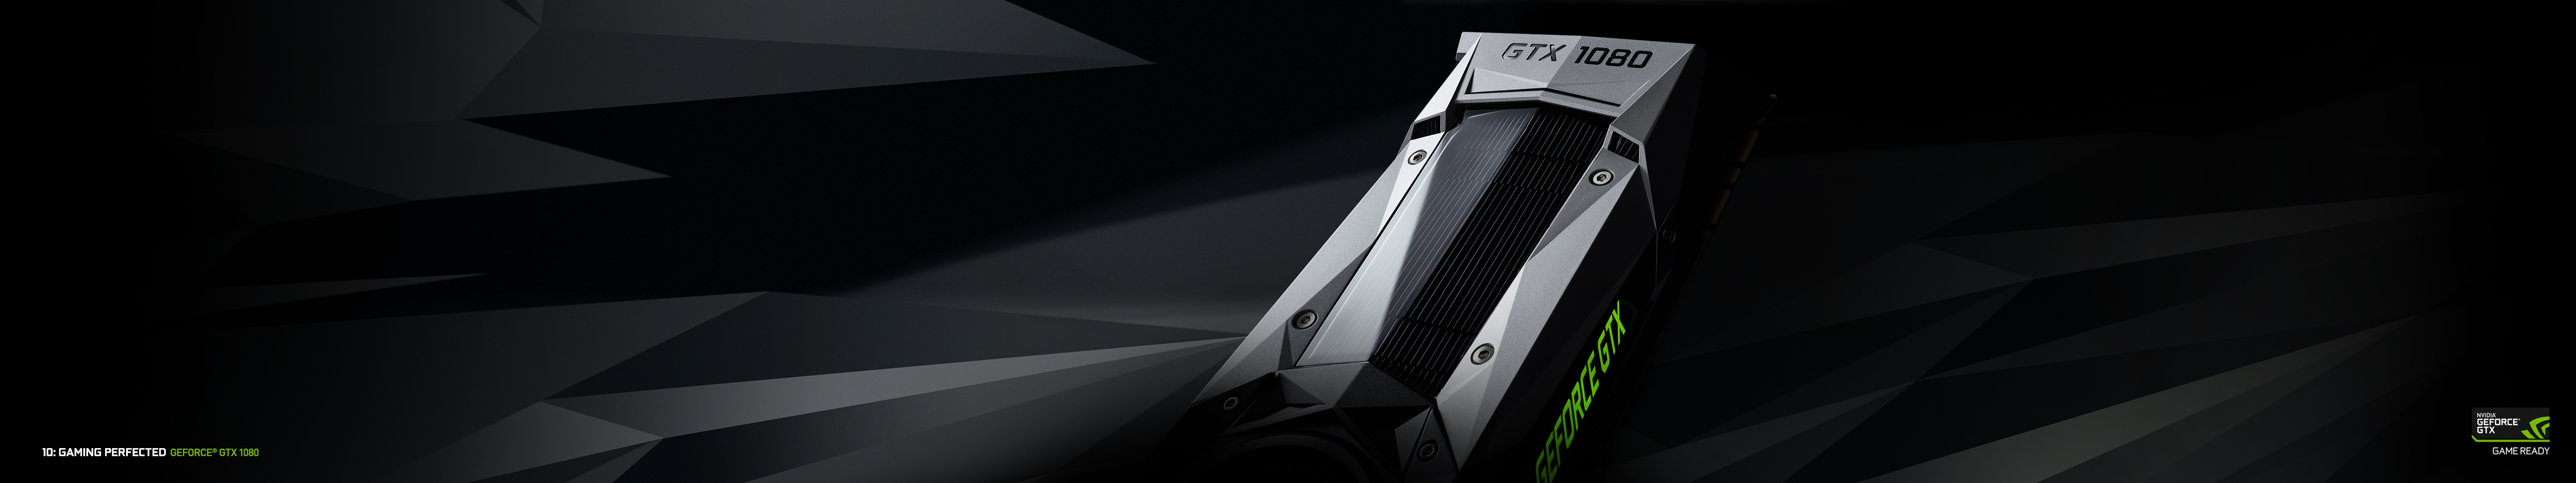 Geforce Wallpaper For Your Gaming Rig Nvidia